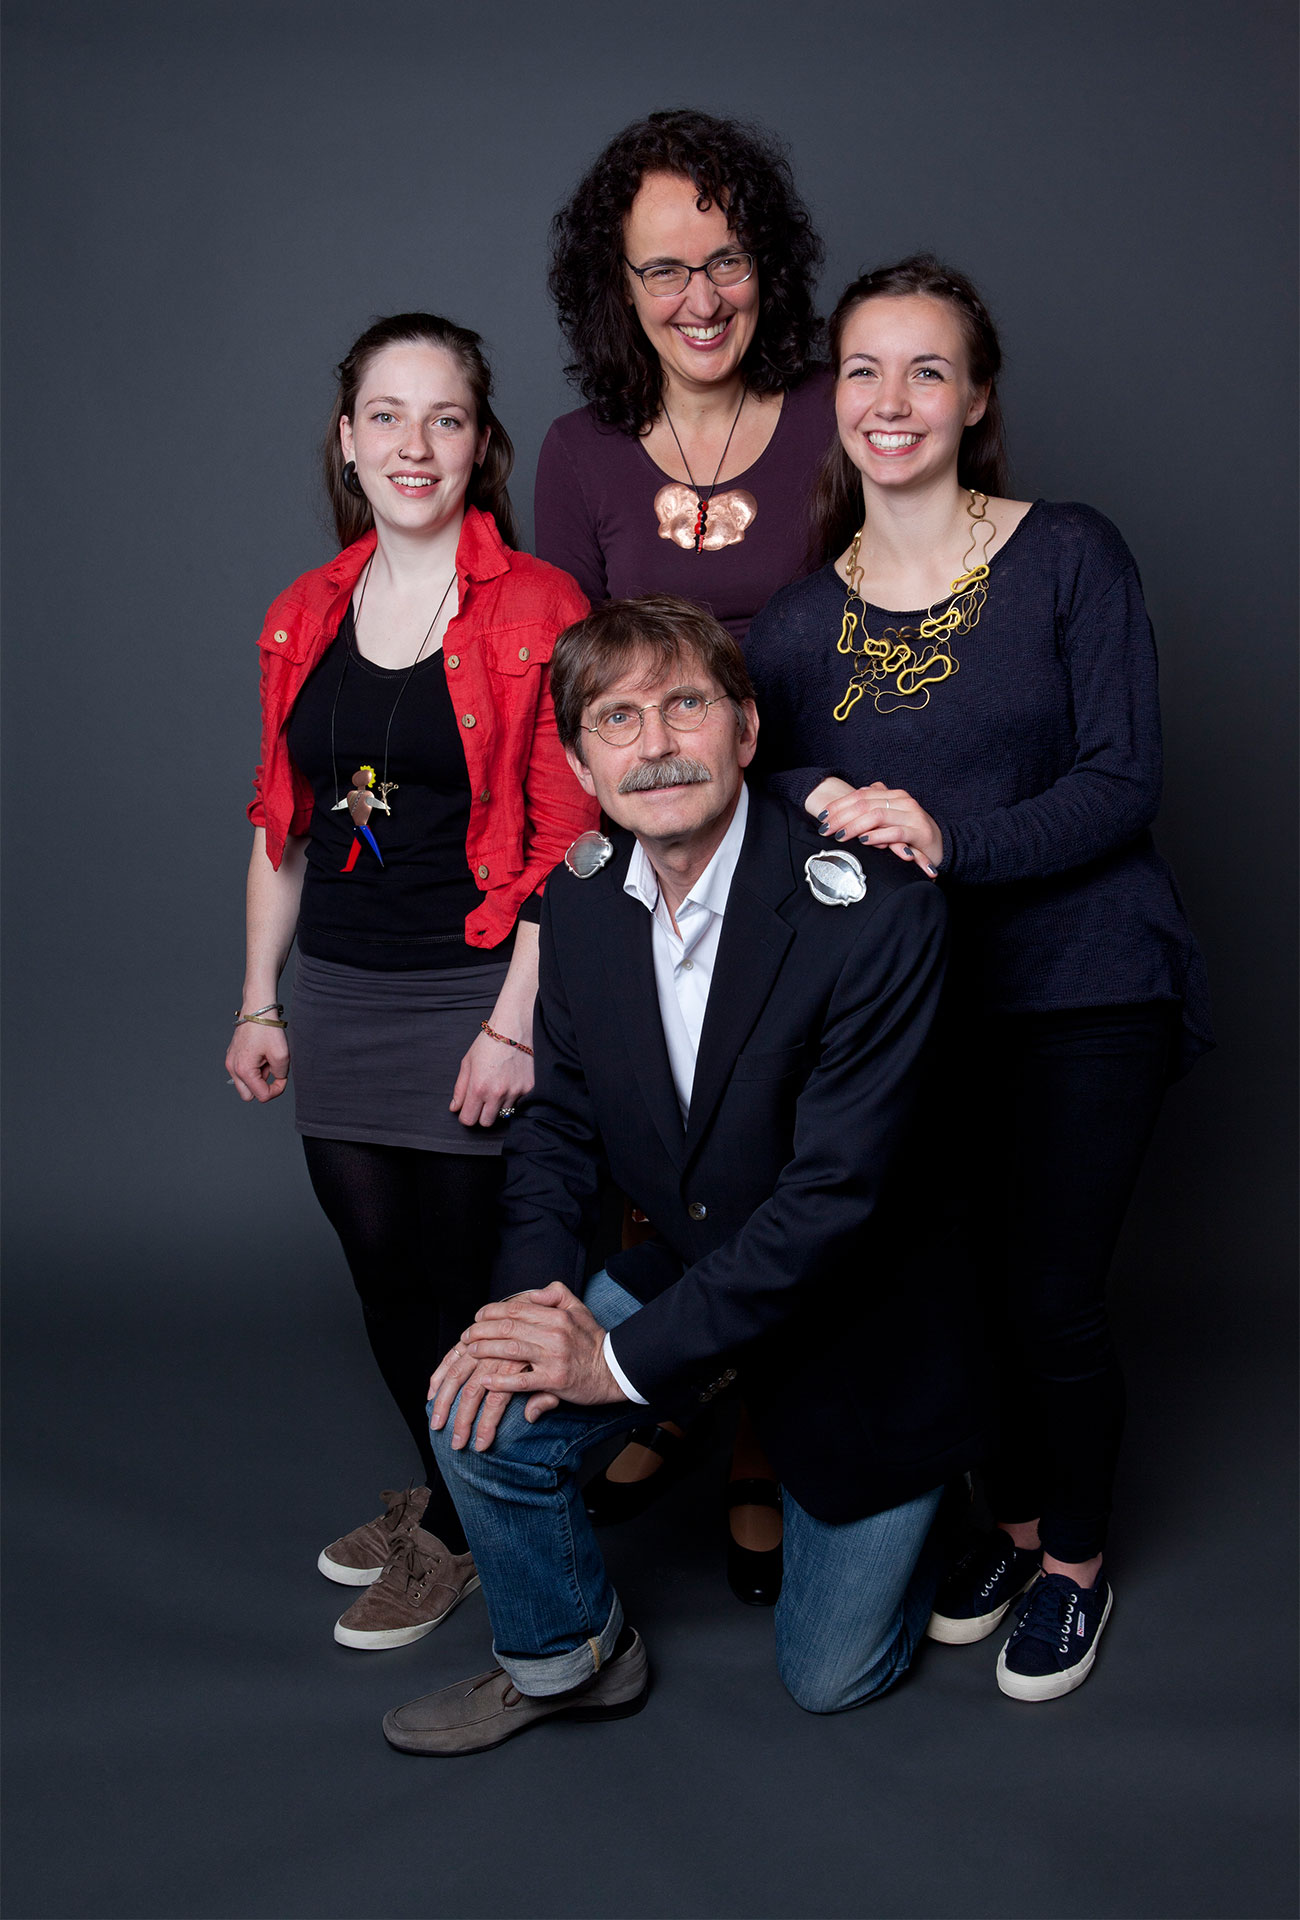 Representatives of Pforzheim’s Goldsmithing School, from left to right: Carla Bombardi with a pendant by Aiganysh Duisheeva, acrylic glass, copper, nickel silver, brass, Batho Gündra with brooches by Ephanie Koch, silver-plated copper, Juliane Brandes with a pendant by Kyril Kislgakov, copper, brass, lacquer, and Paula Flock with a necklace by Pia Drechsel’s graduation piece, brass, fabric